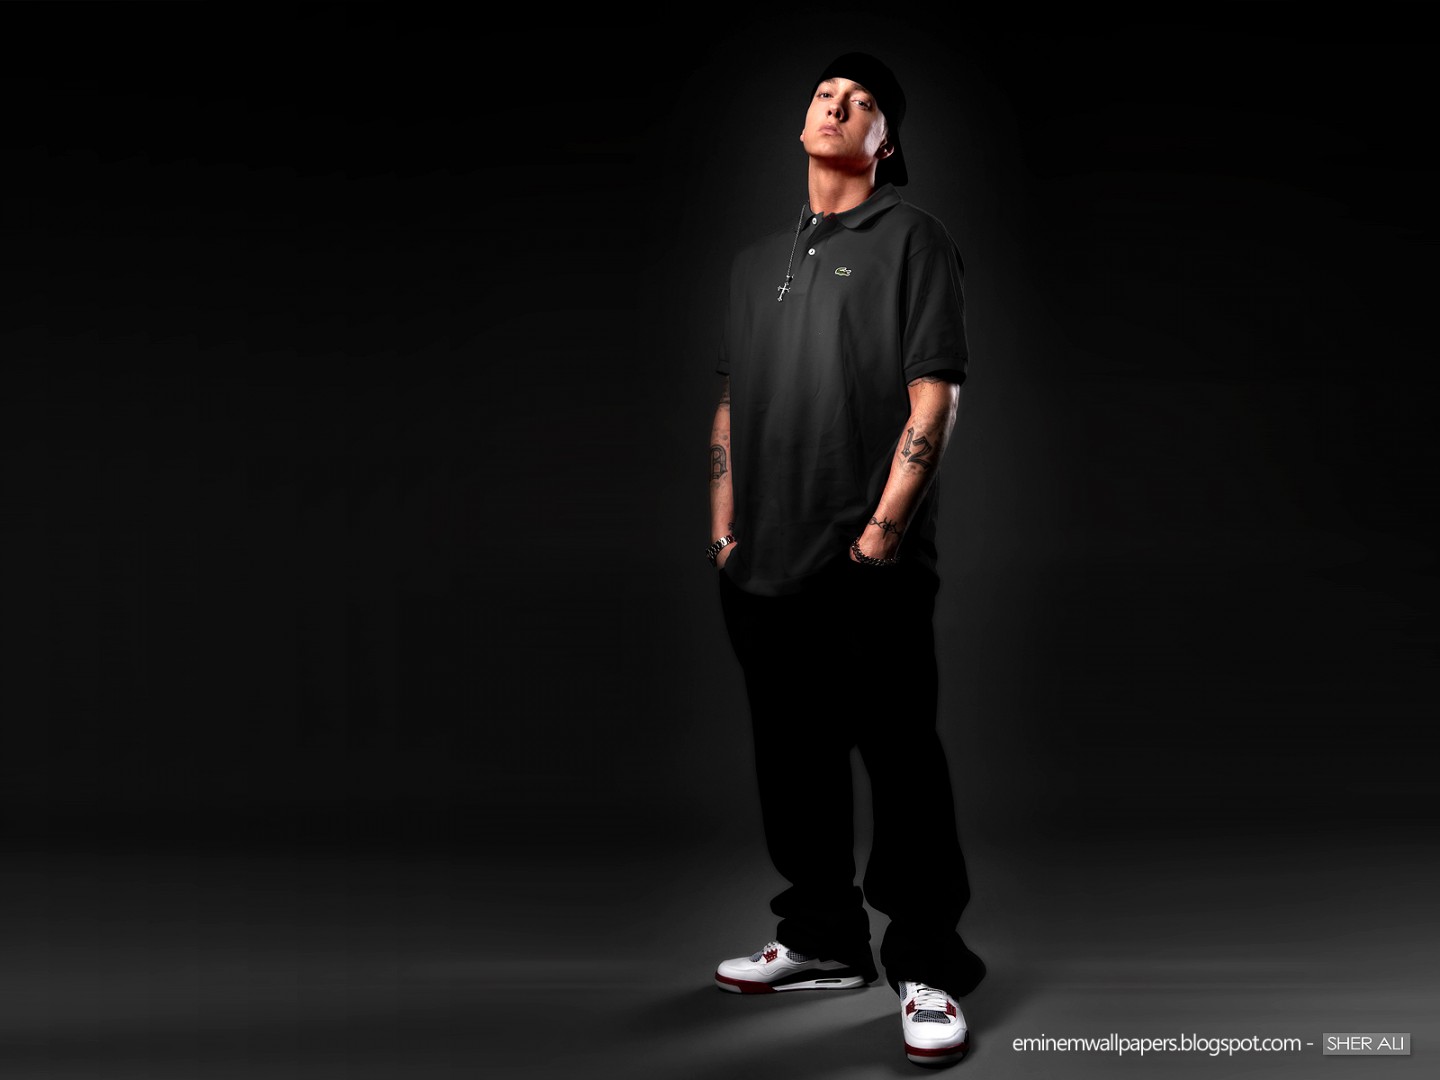 Eminem HD Wallpaper Background Pictures To Pin